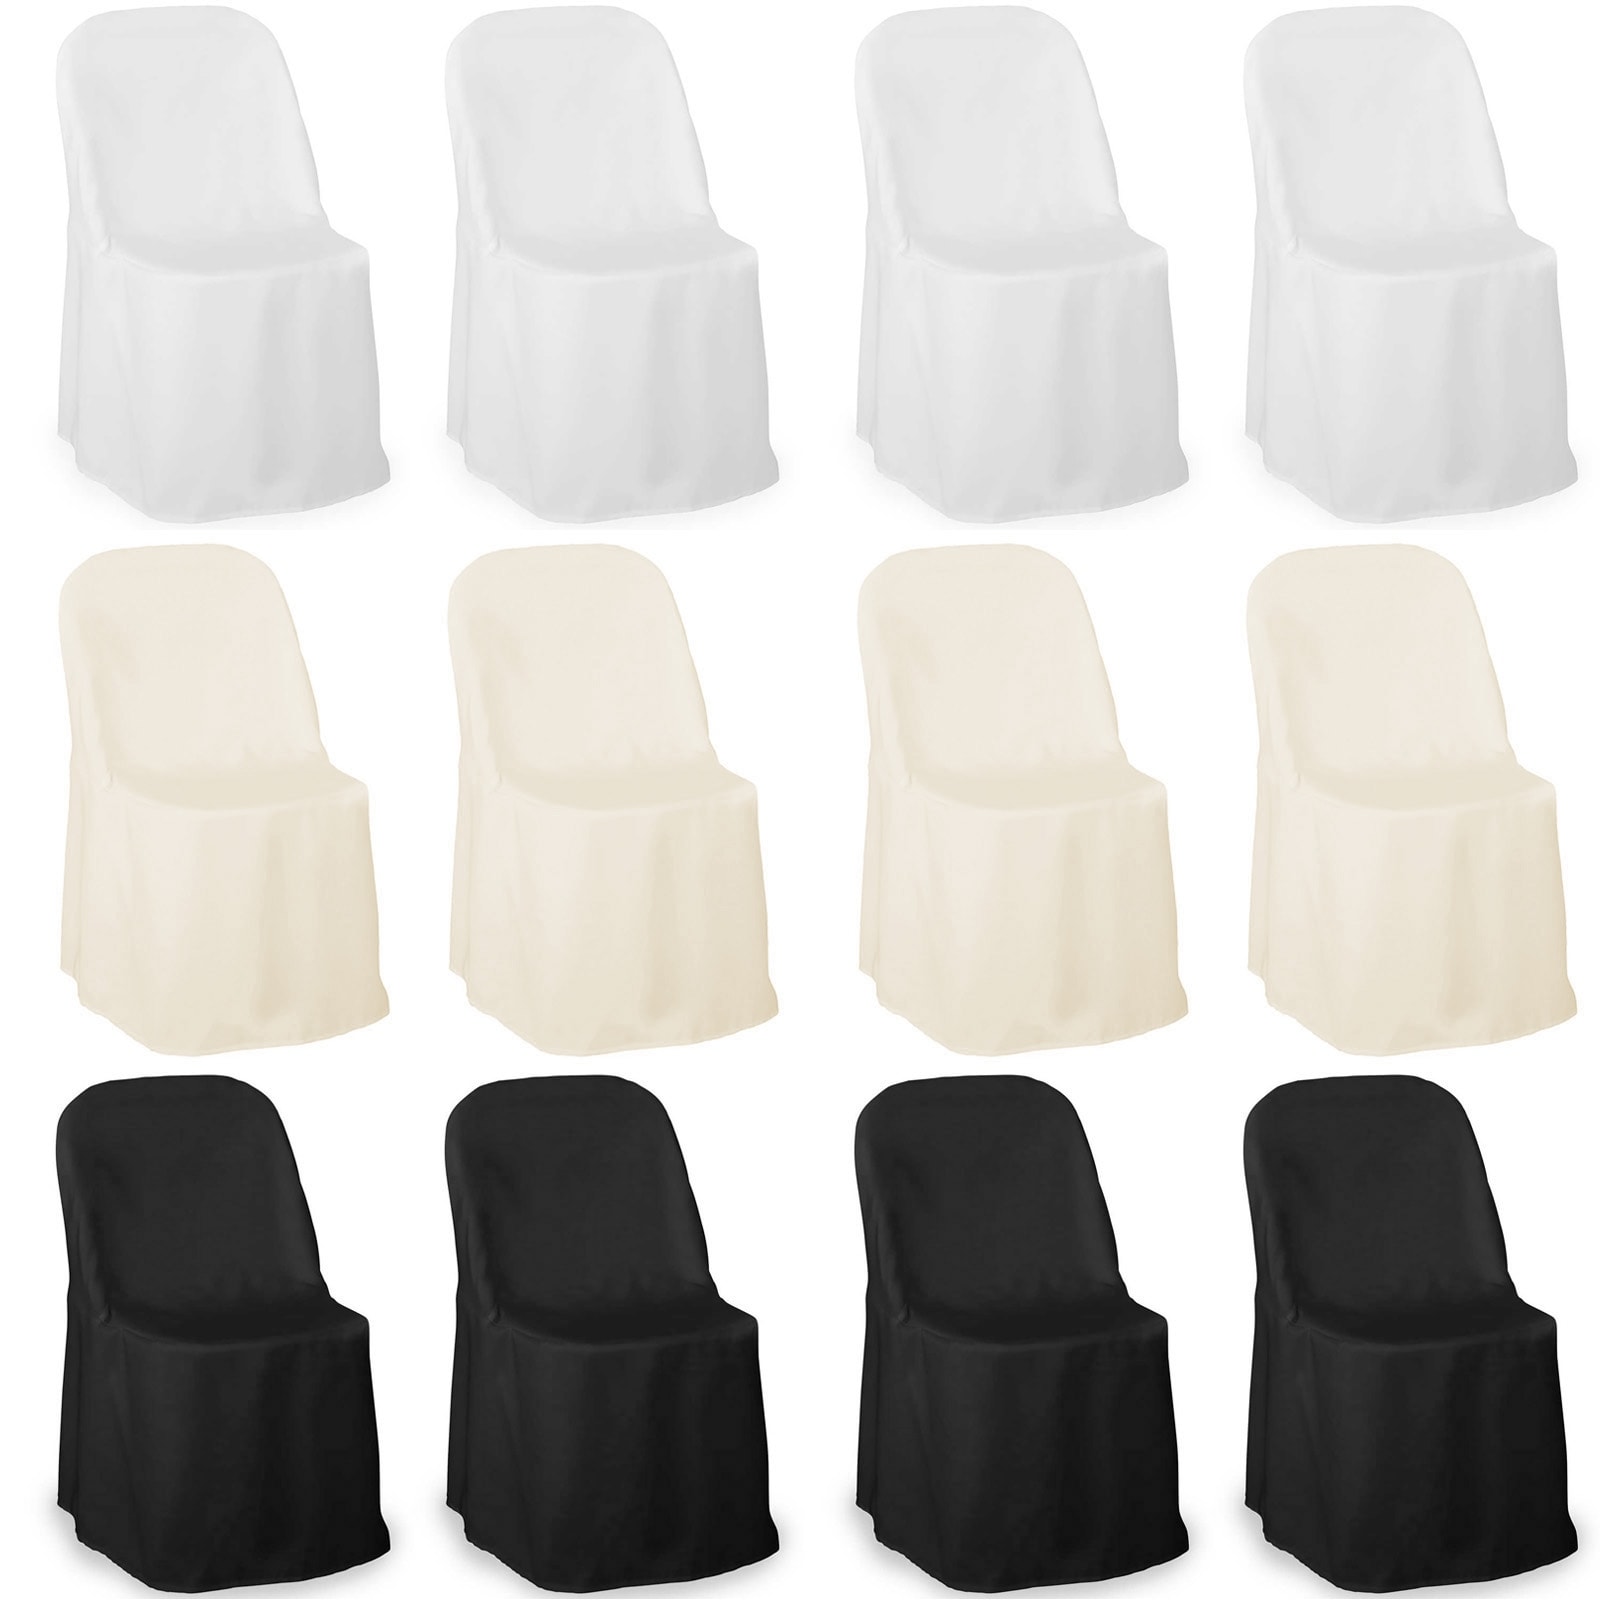 100 White Polyester FOLDING Flat CHAIR COVERS Wedding Party Banquet Decorations 